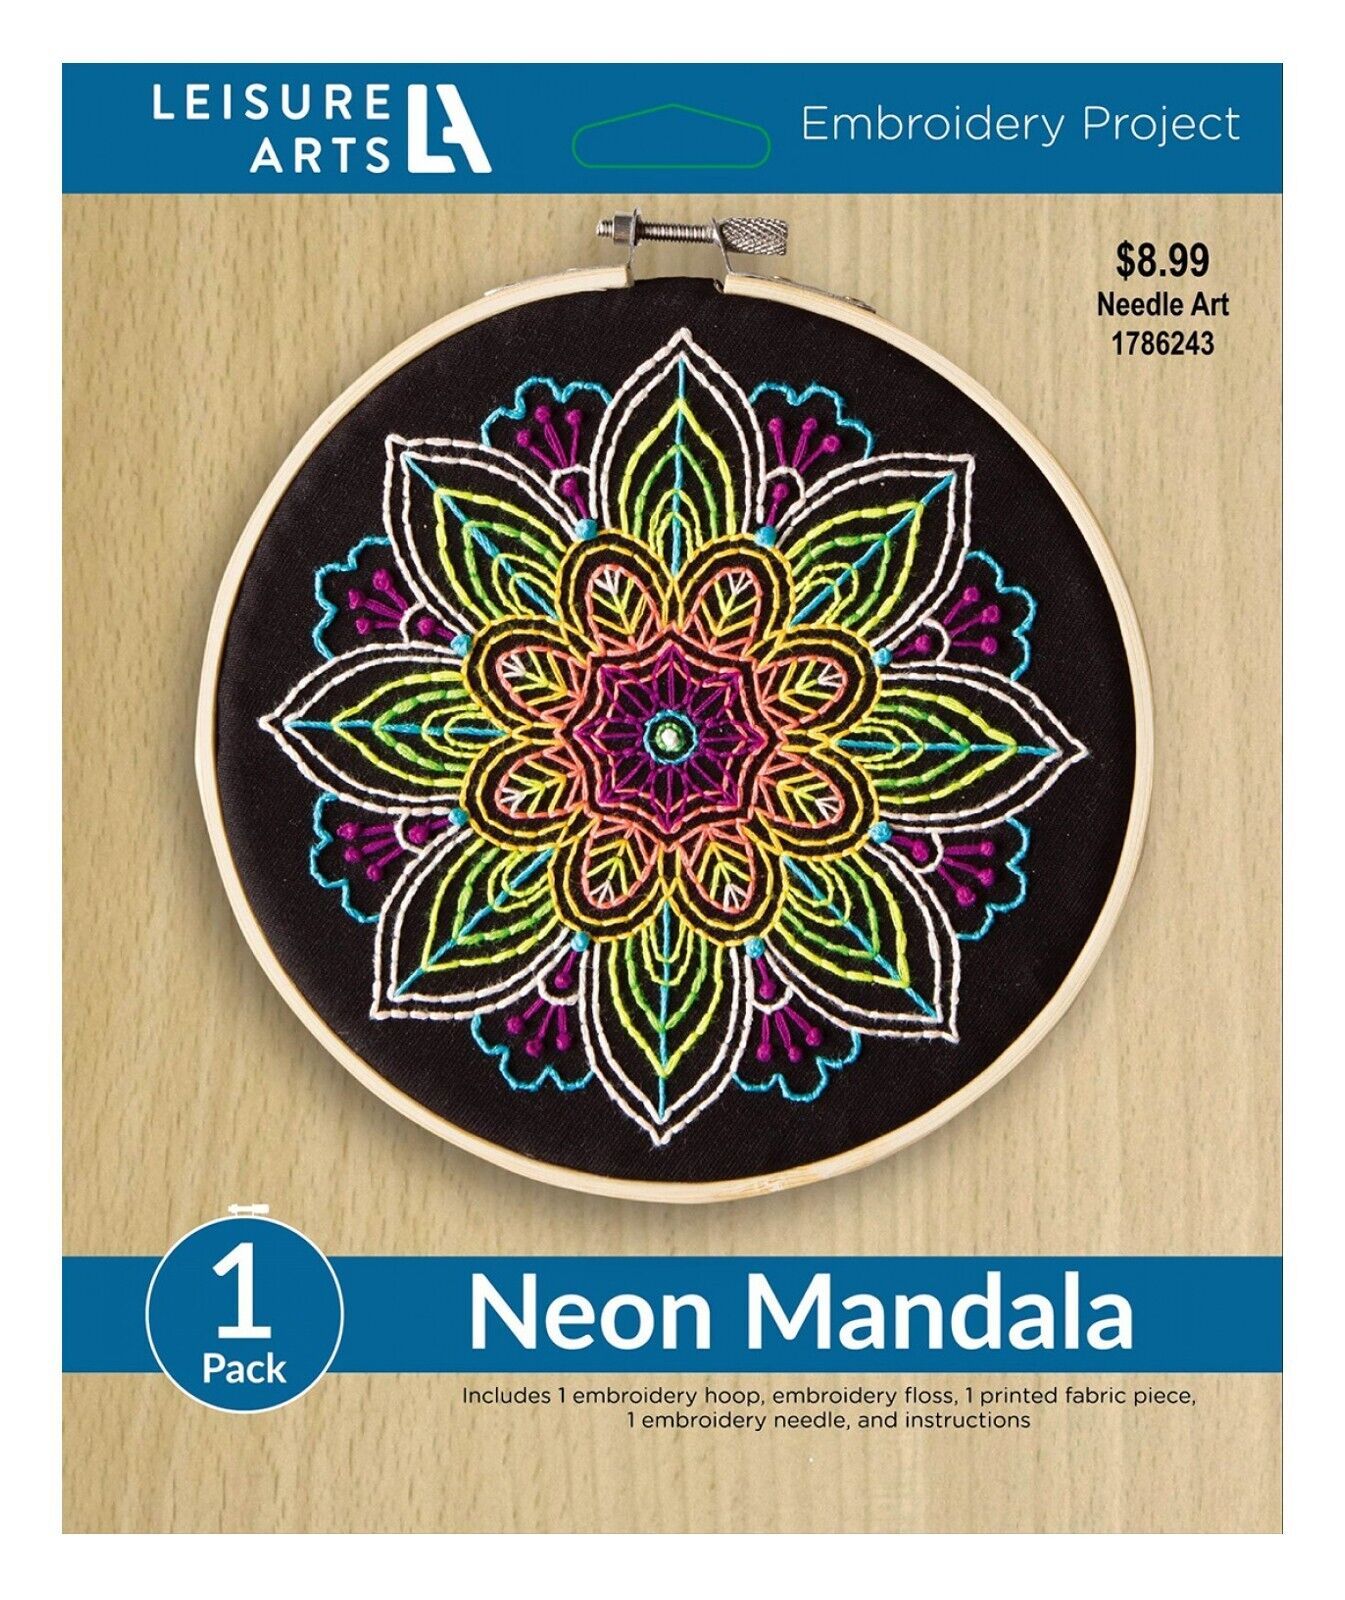 Primary image for Leisure Arts Neon Mandala 6 Inch Embroidery Kit 49808